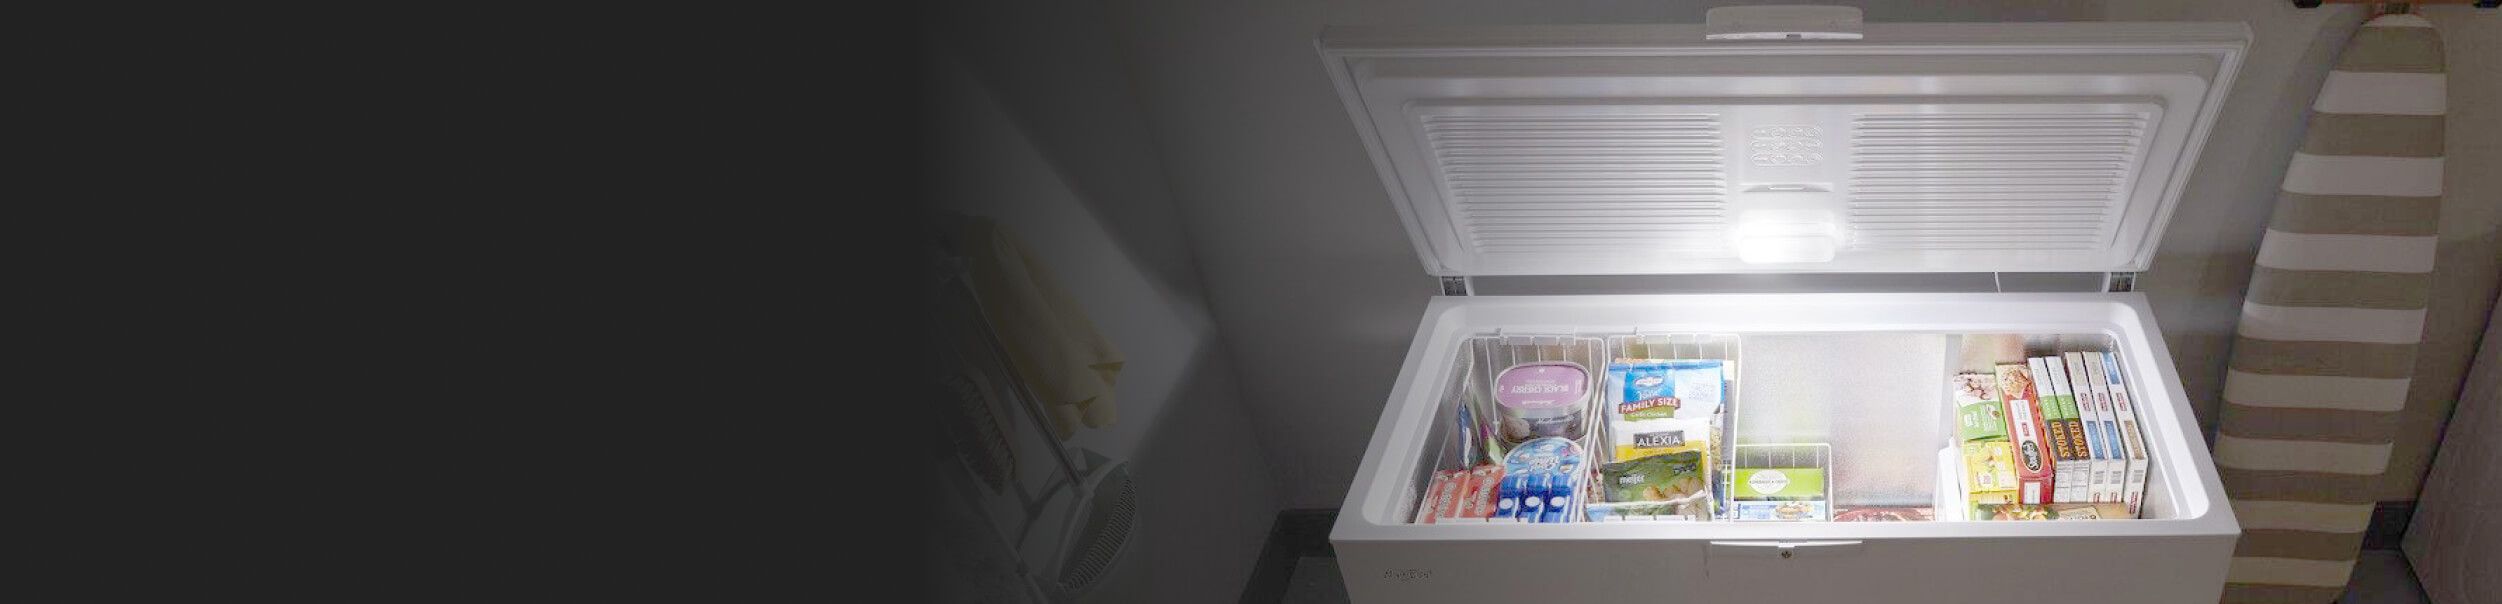 Open chest freezer loaded with frozen items